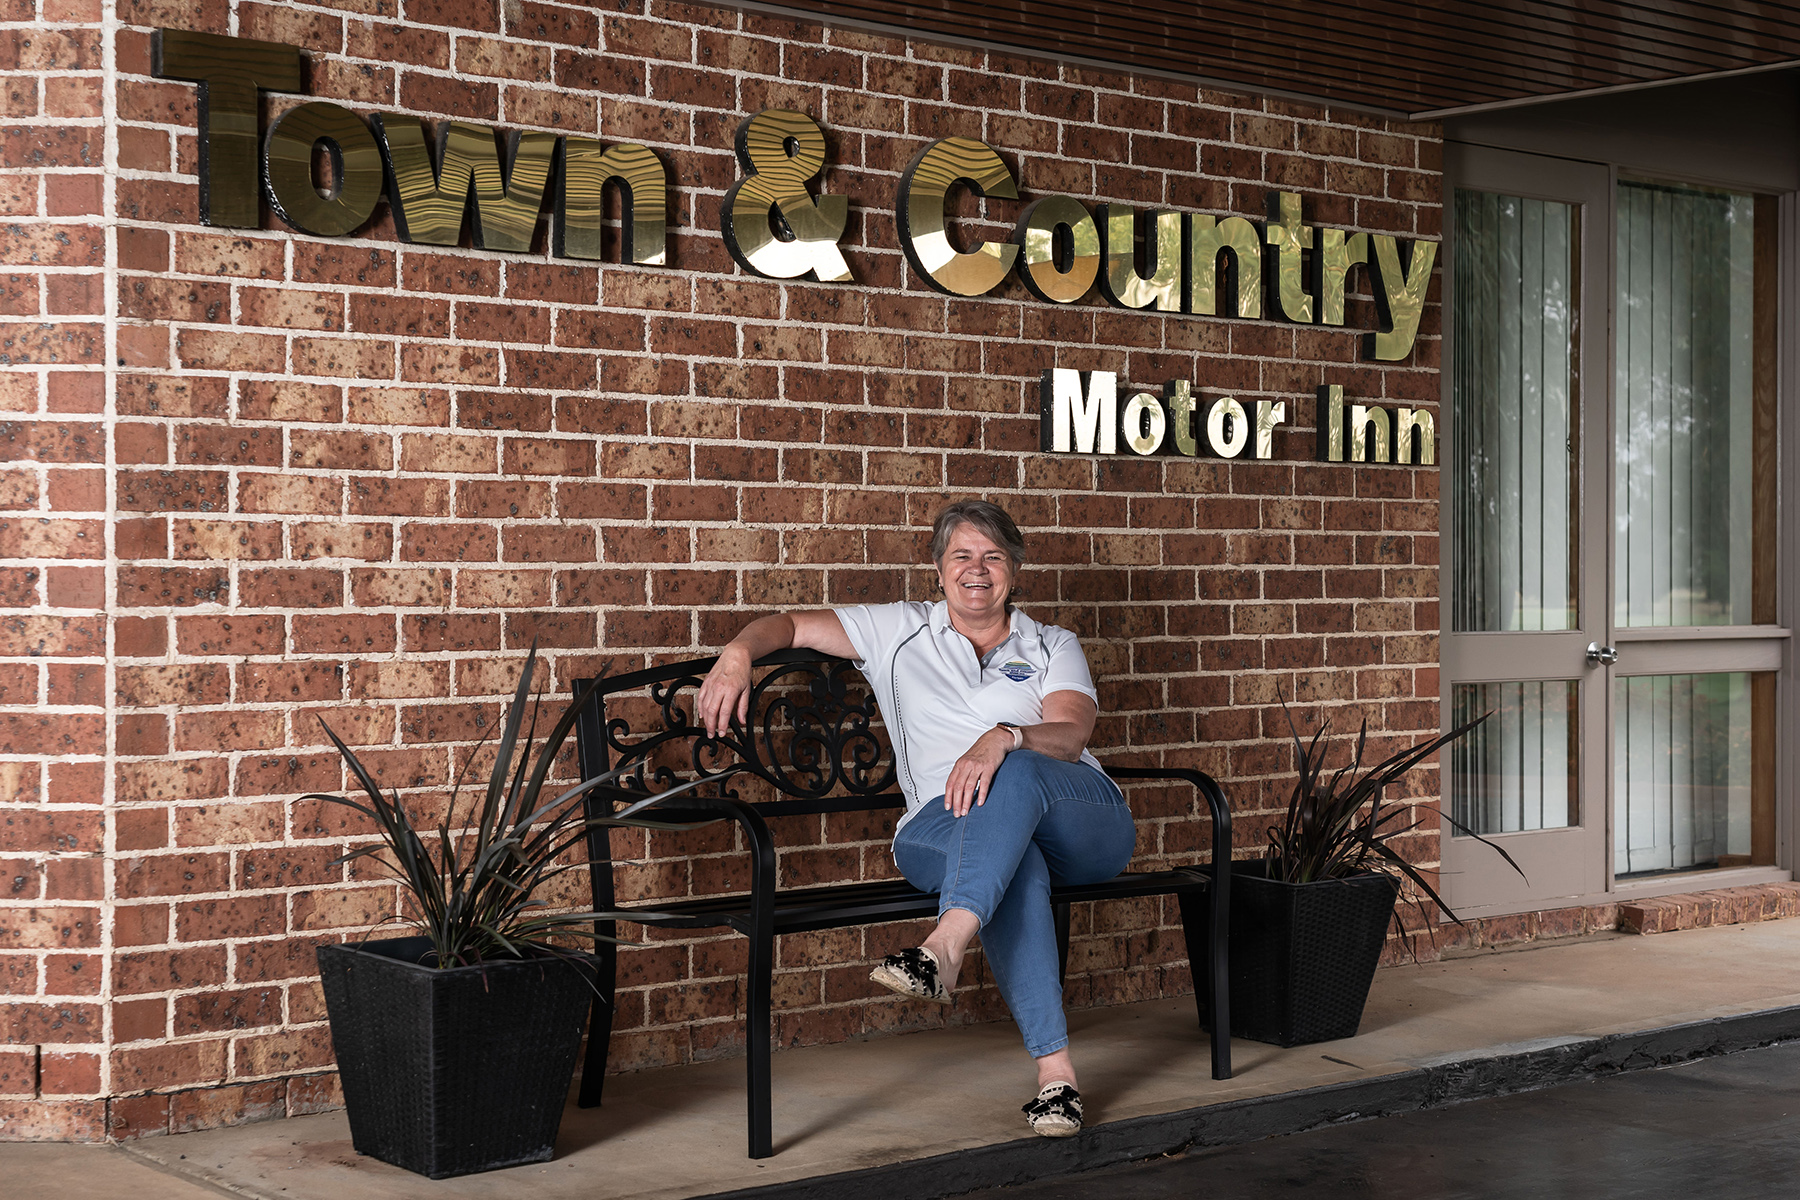 Lynette Whiting, Manager of Town and Country Motel in Forbes